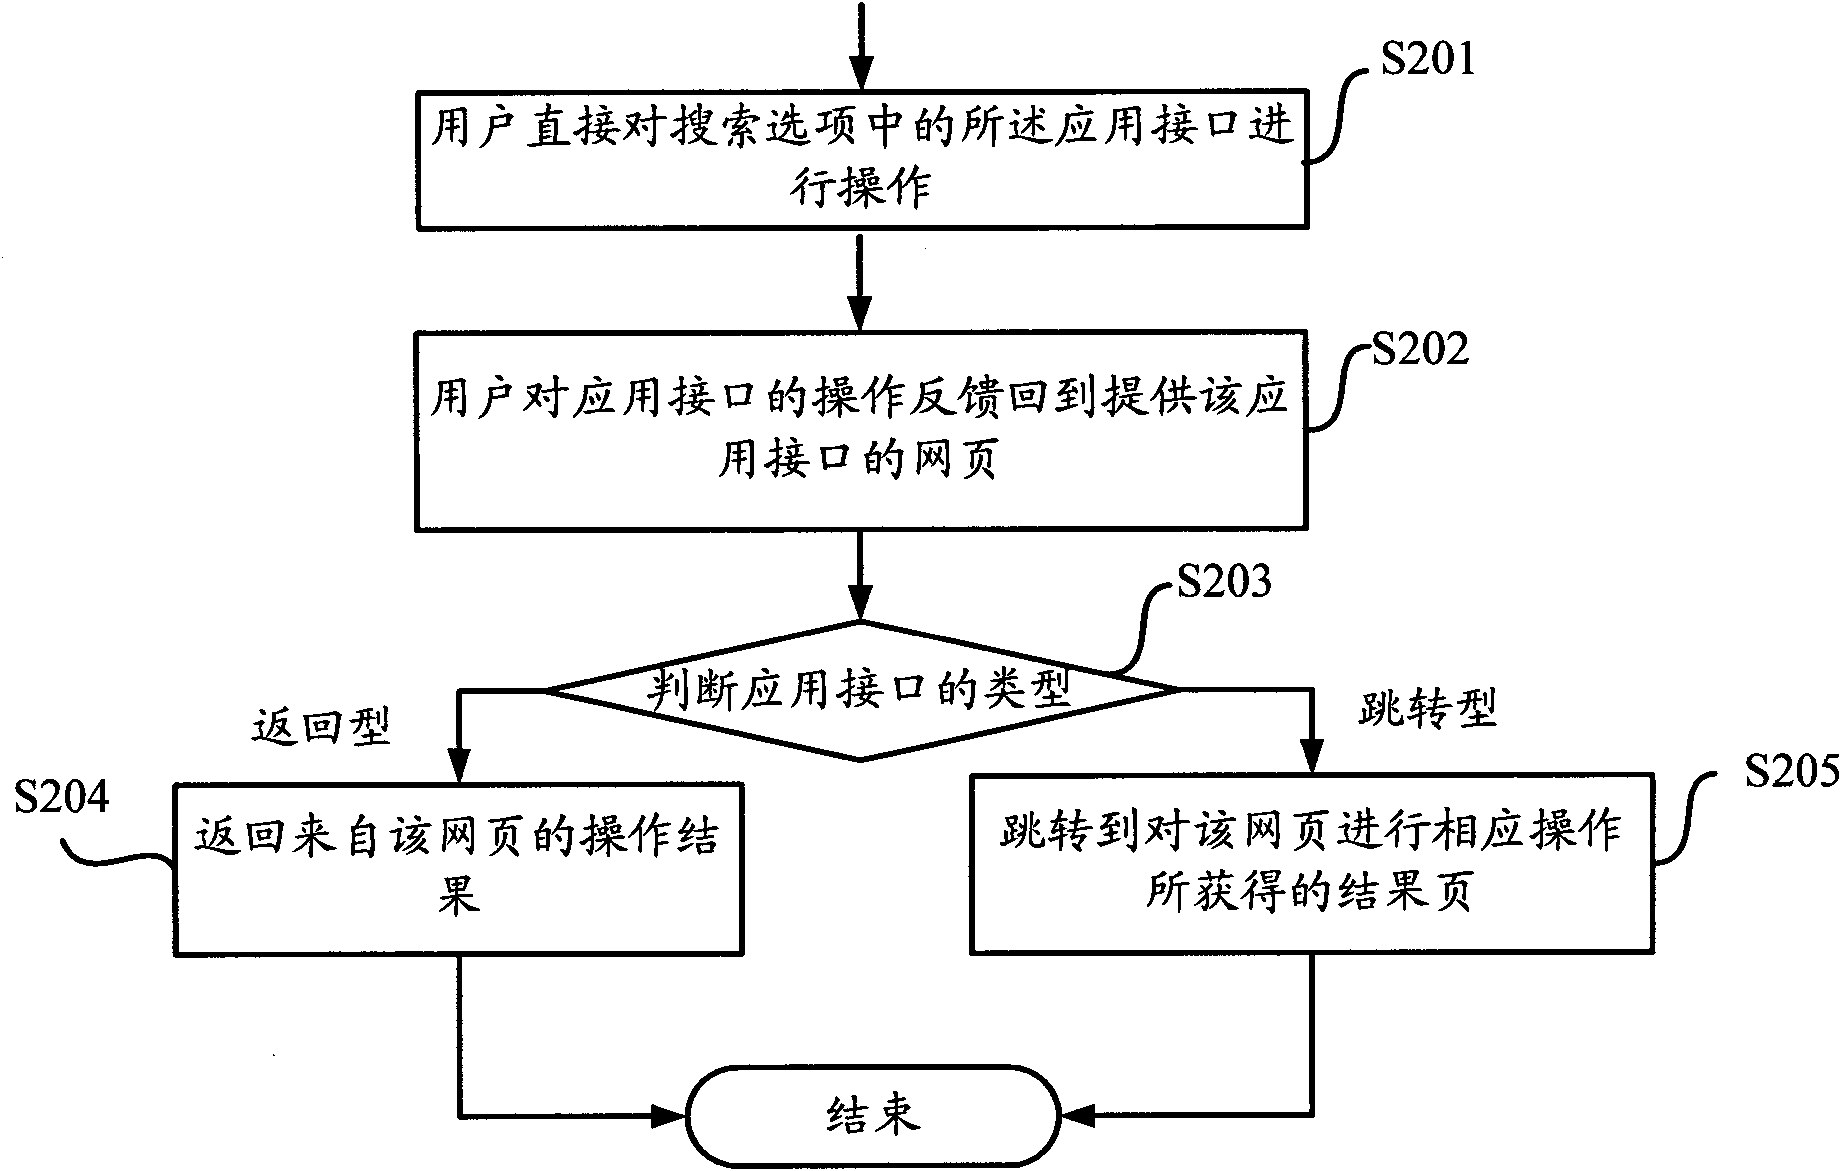 Method and equipment combining search and application